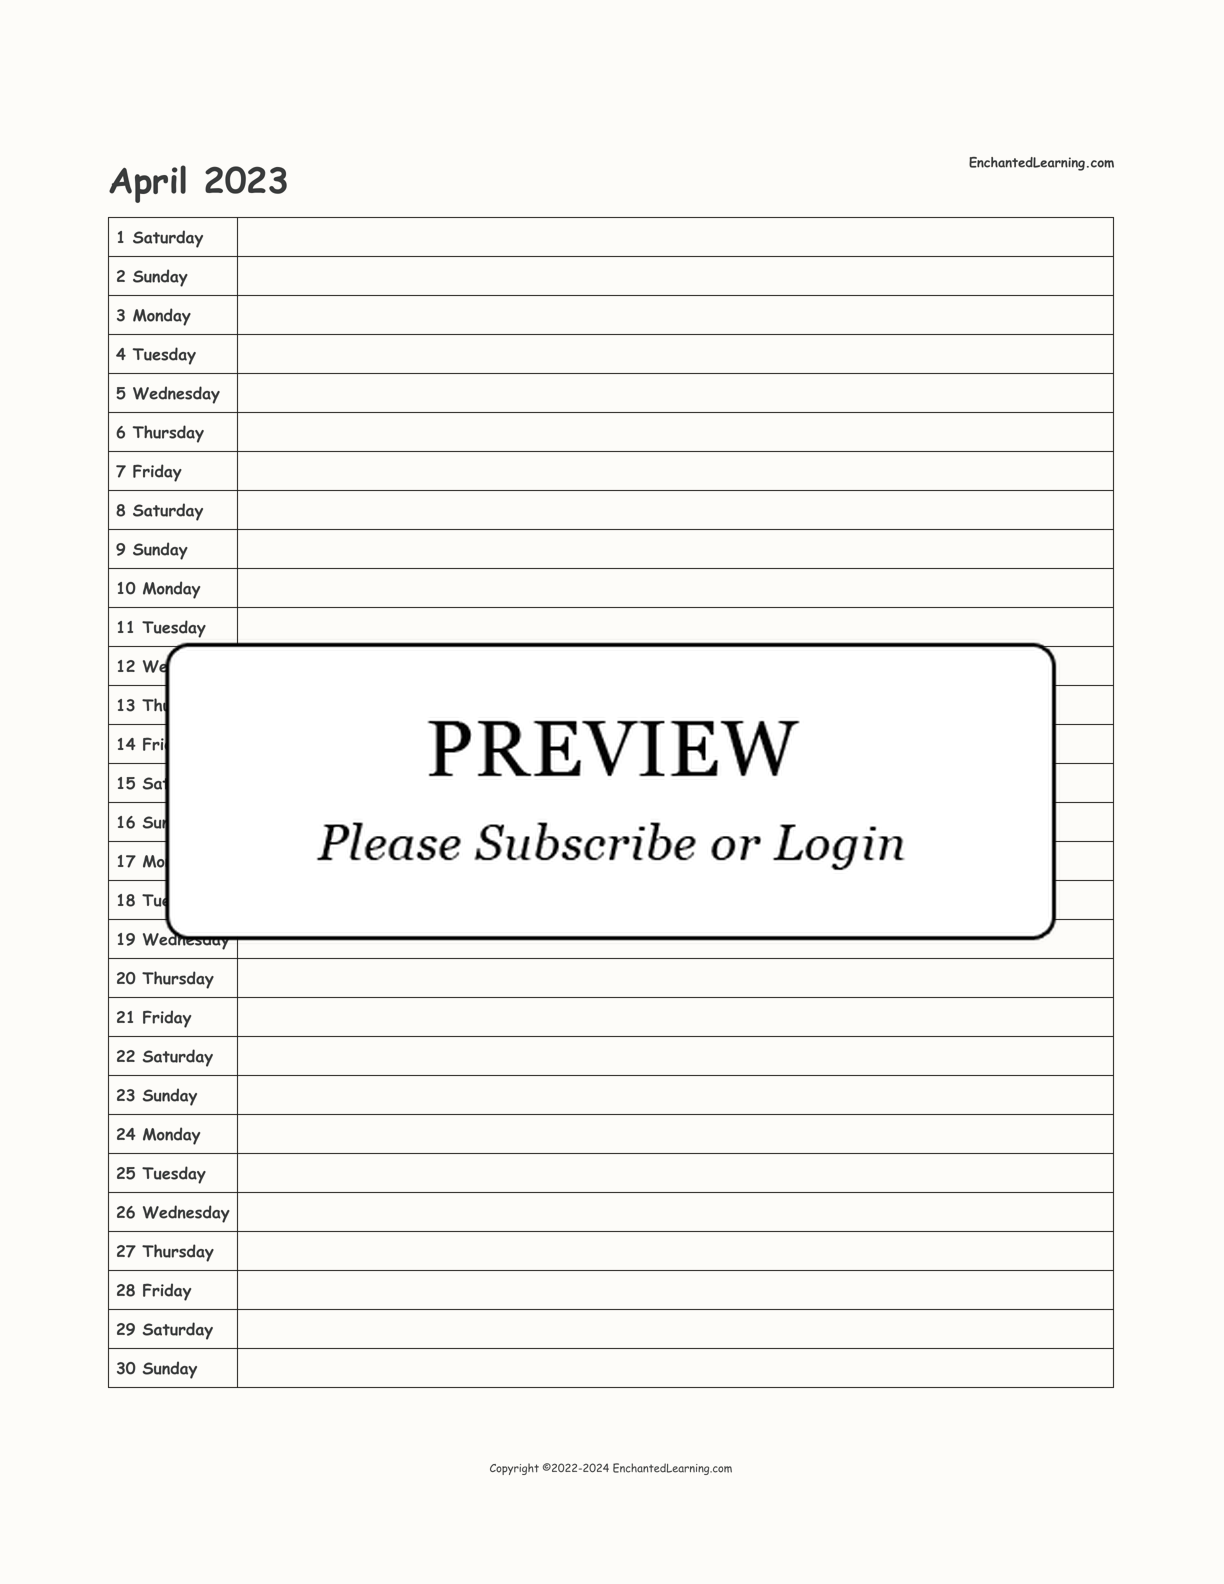 2023 Scheduling Calendar interactive printout page 4